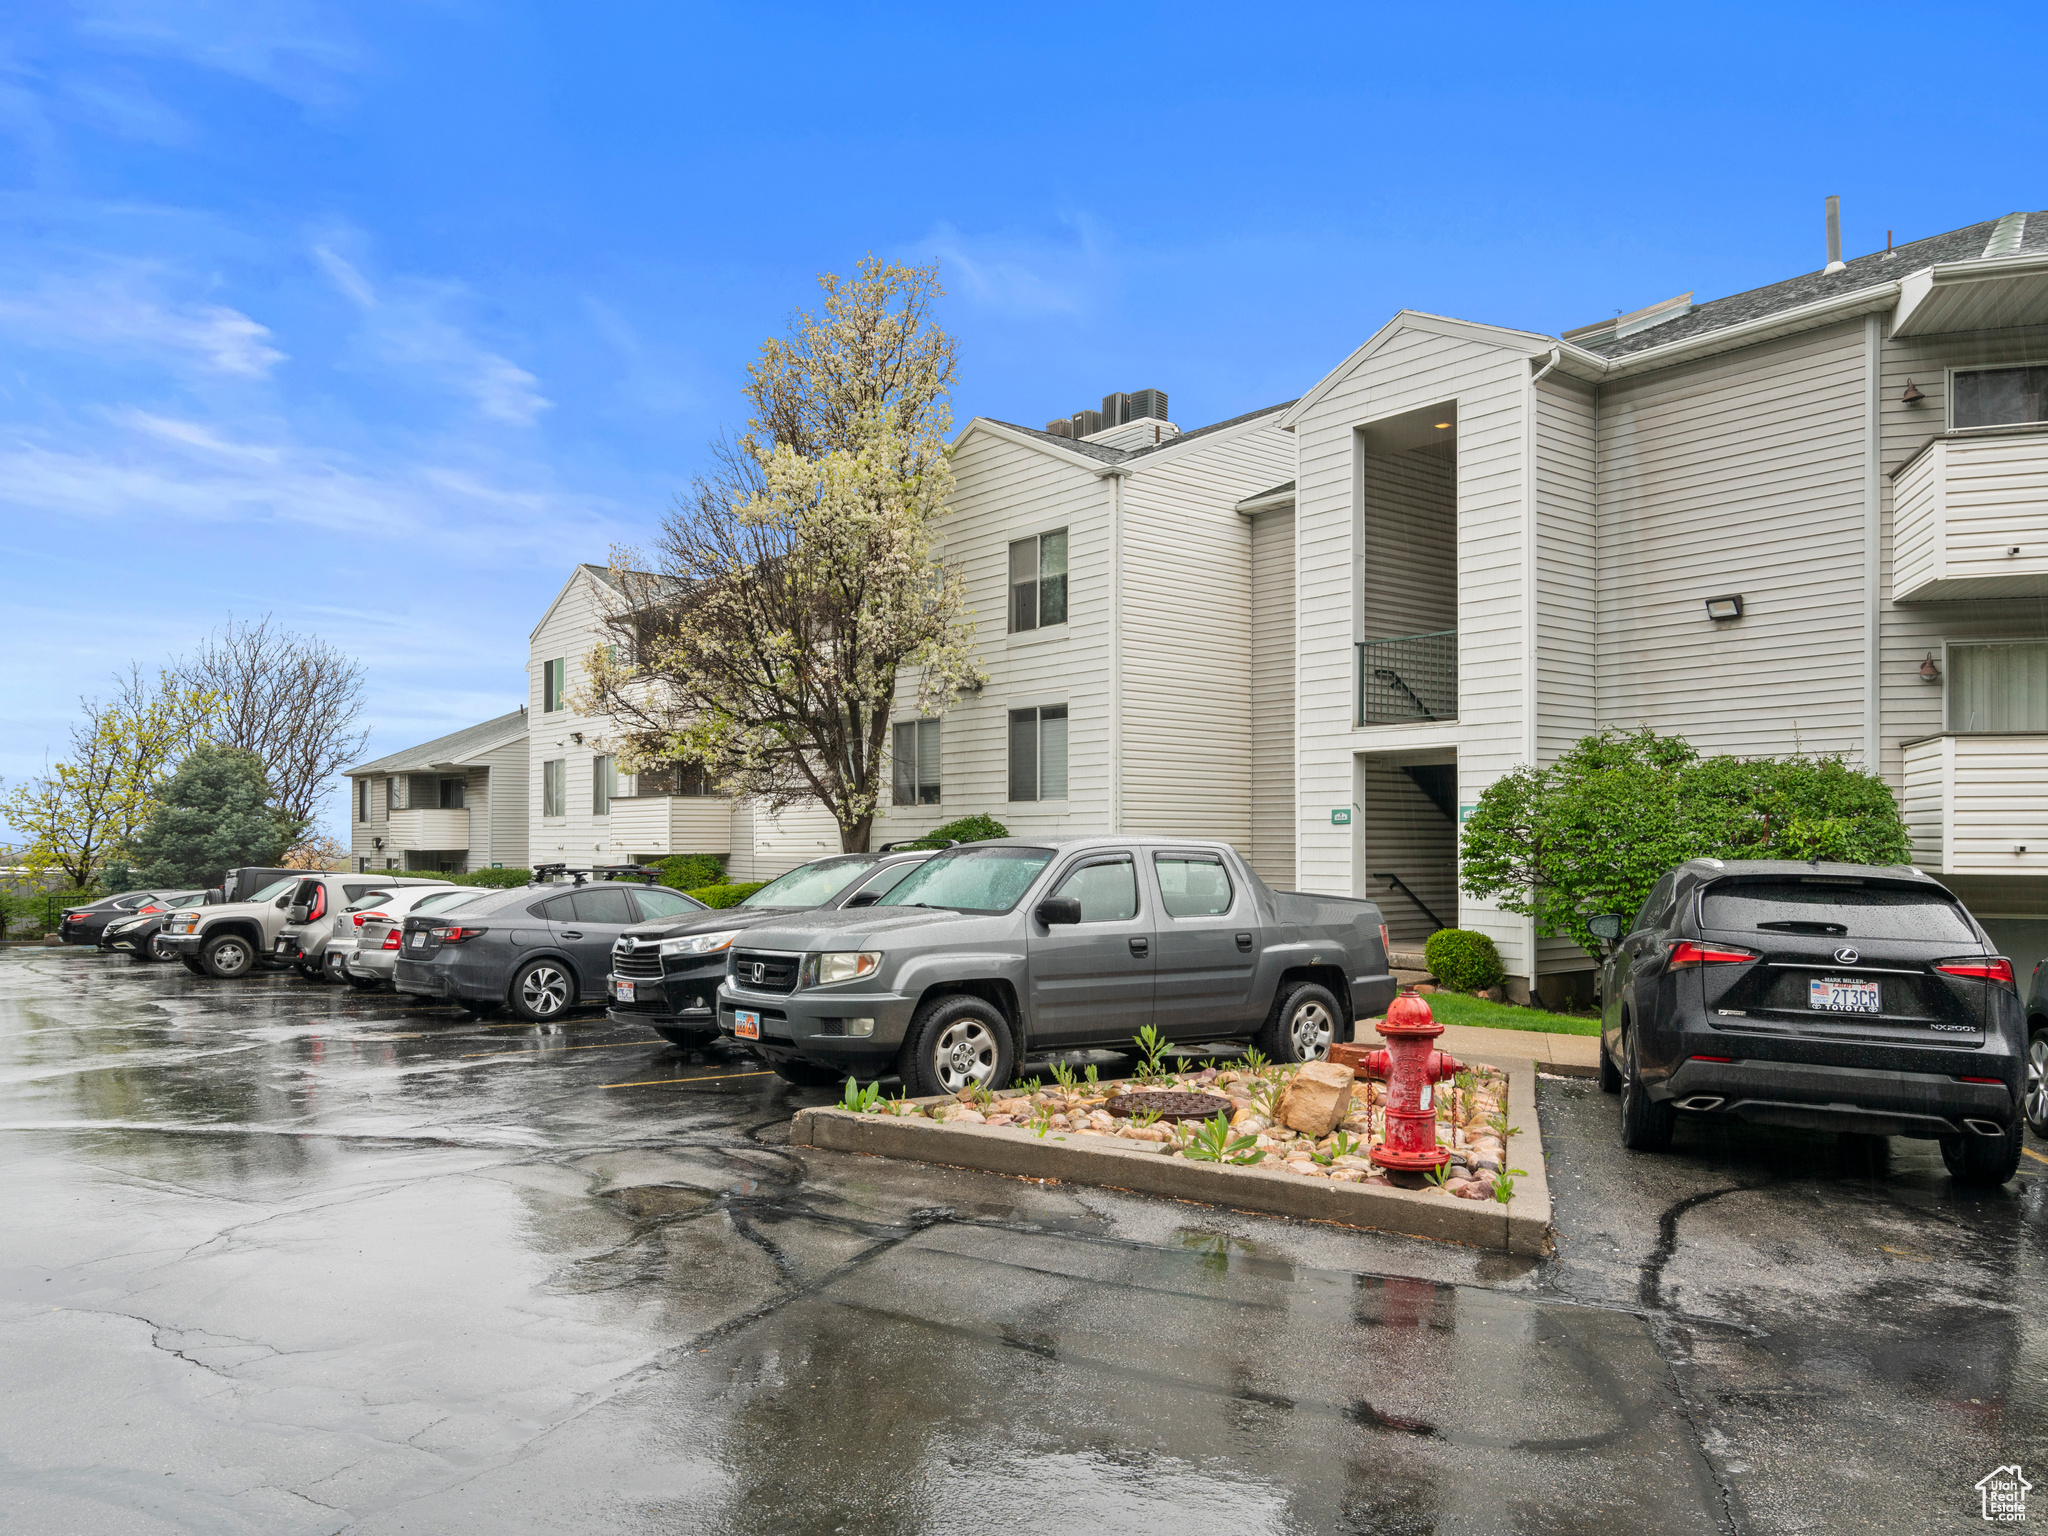 543 S 900 E E #A14, Salt Lake City, Utah 84102, 3 Bedrooms Bedrooms, 8 Rooms Rooms,2 BathroomsBathrooms,Residential,For sale,900 E,1992496